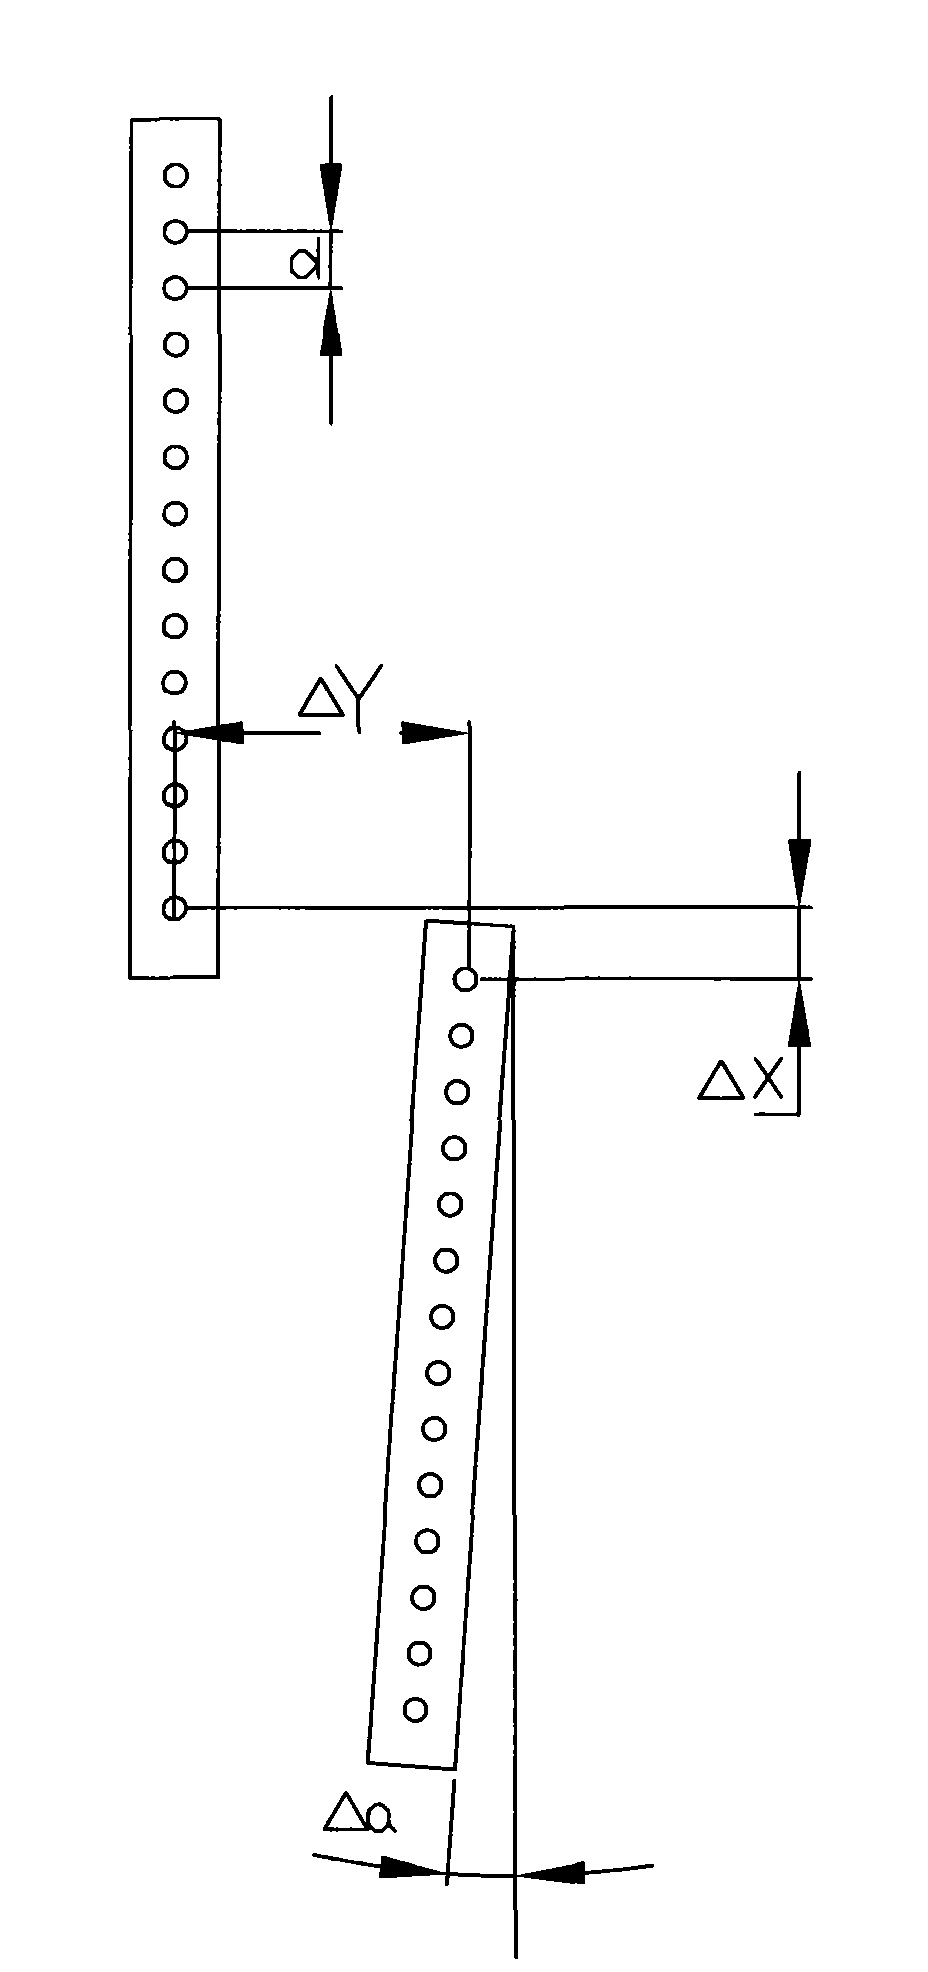 Mechanism for mounting and adjusting spray heads of inkjet printer